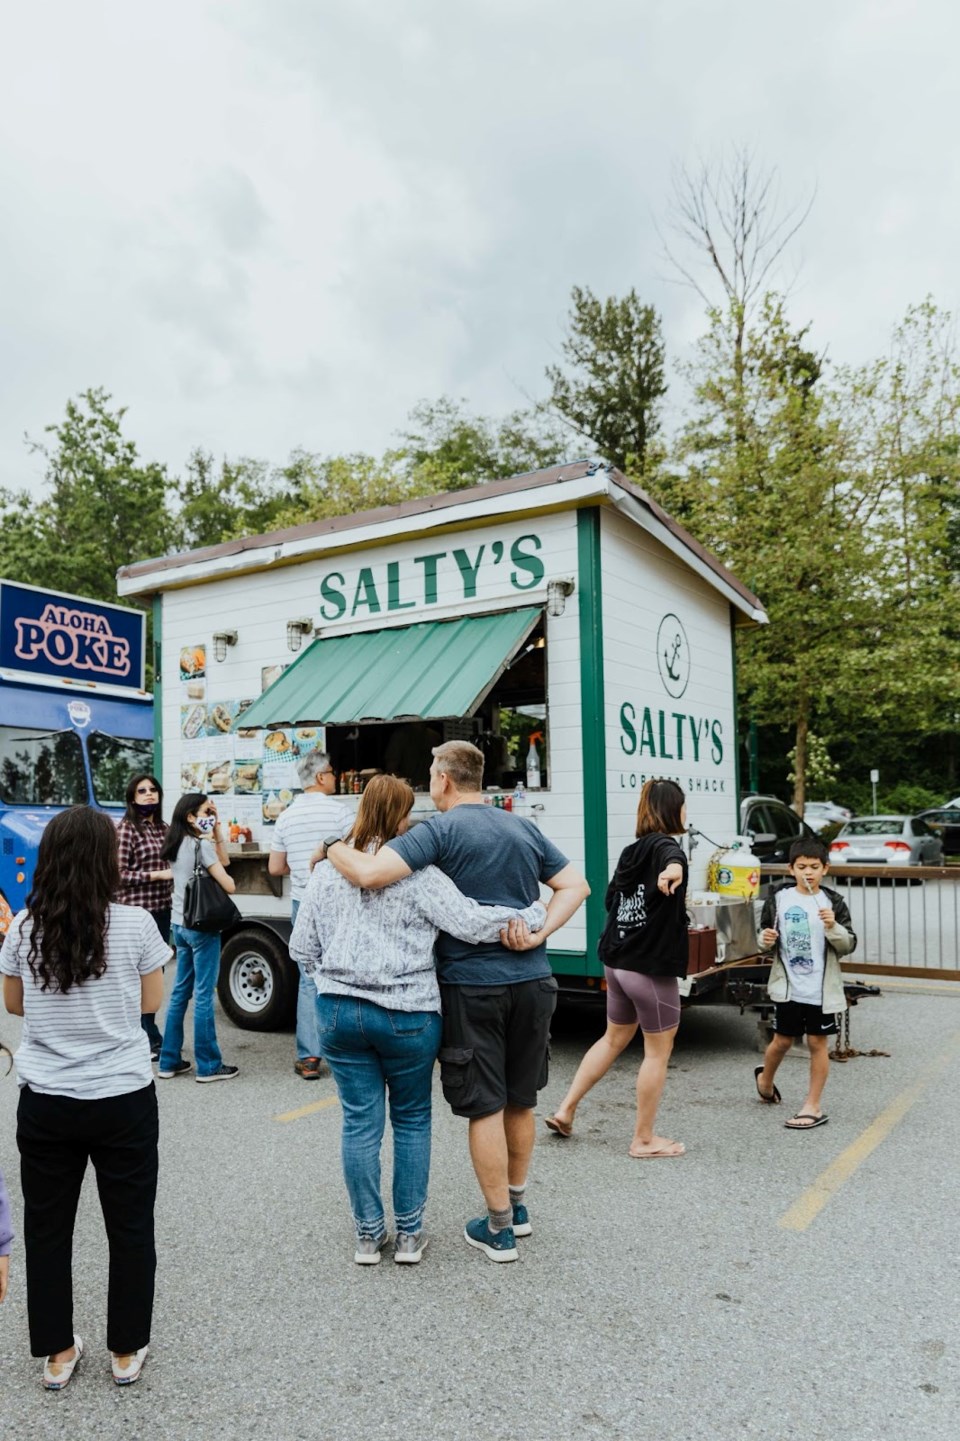 bcimc-realty-nosh-foodie-fest-saltys